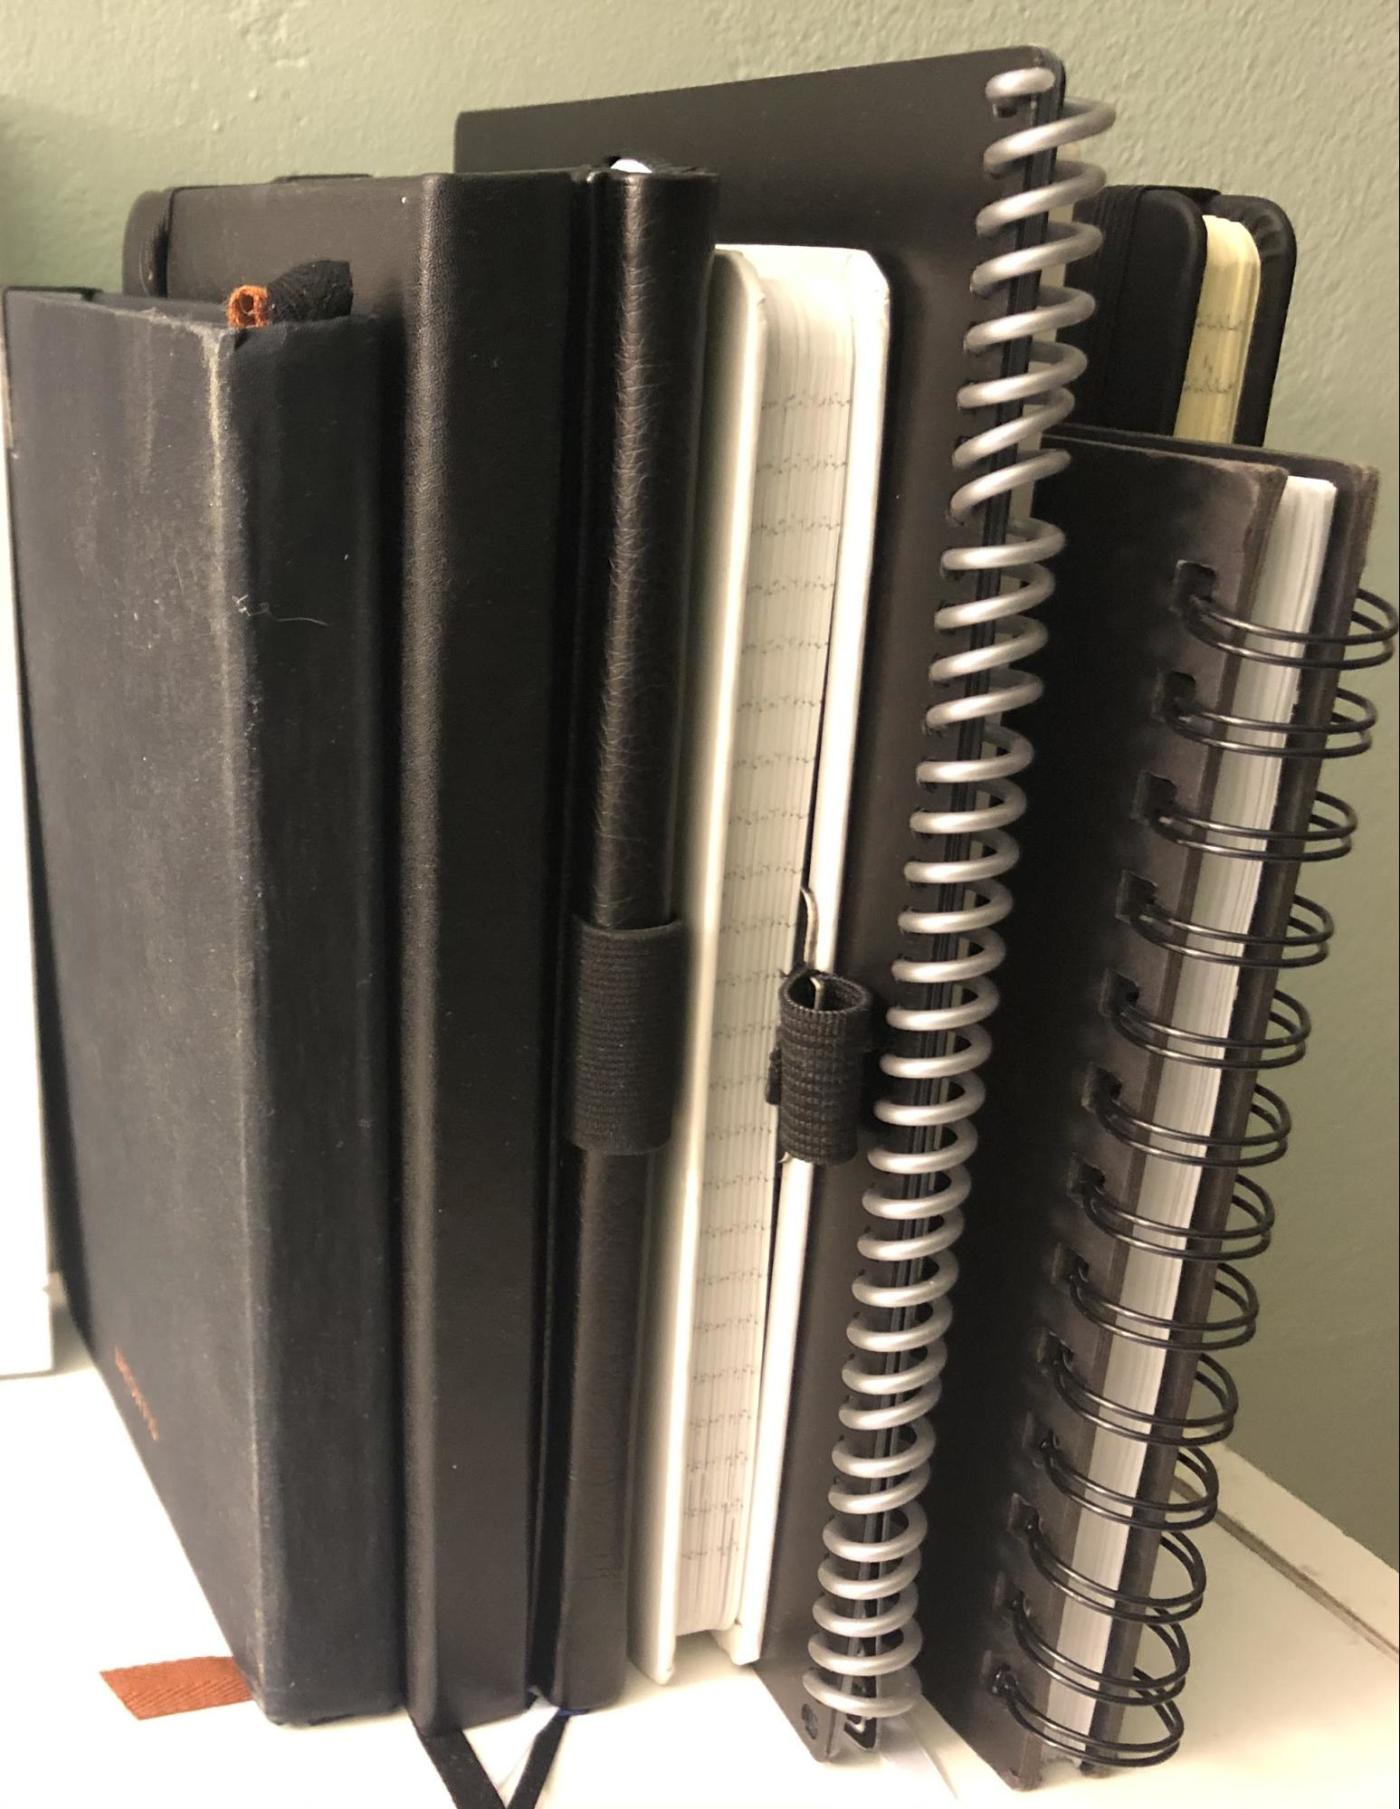 A stack of journals